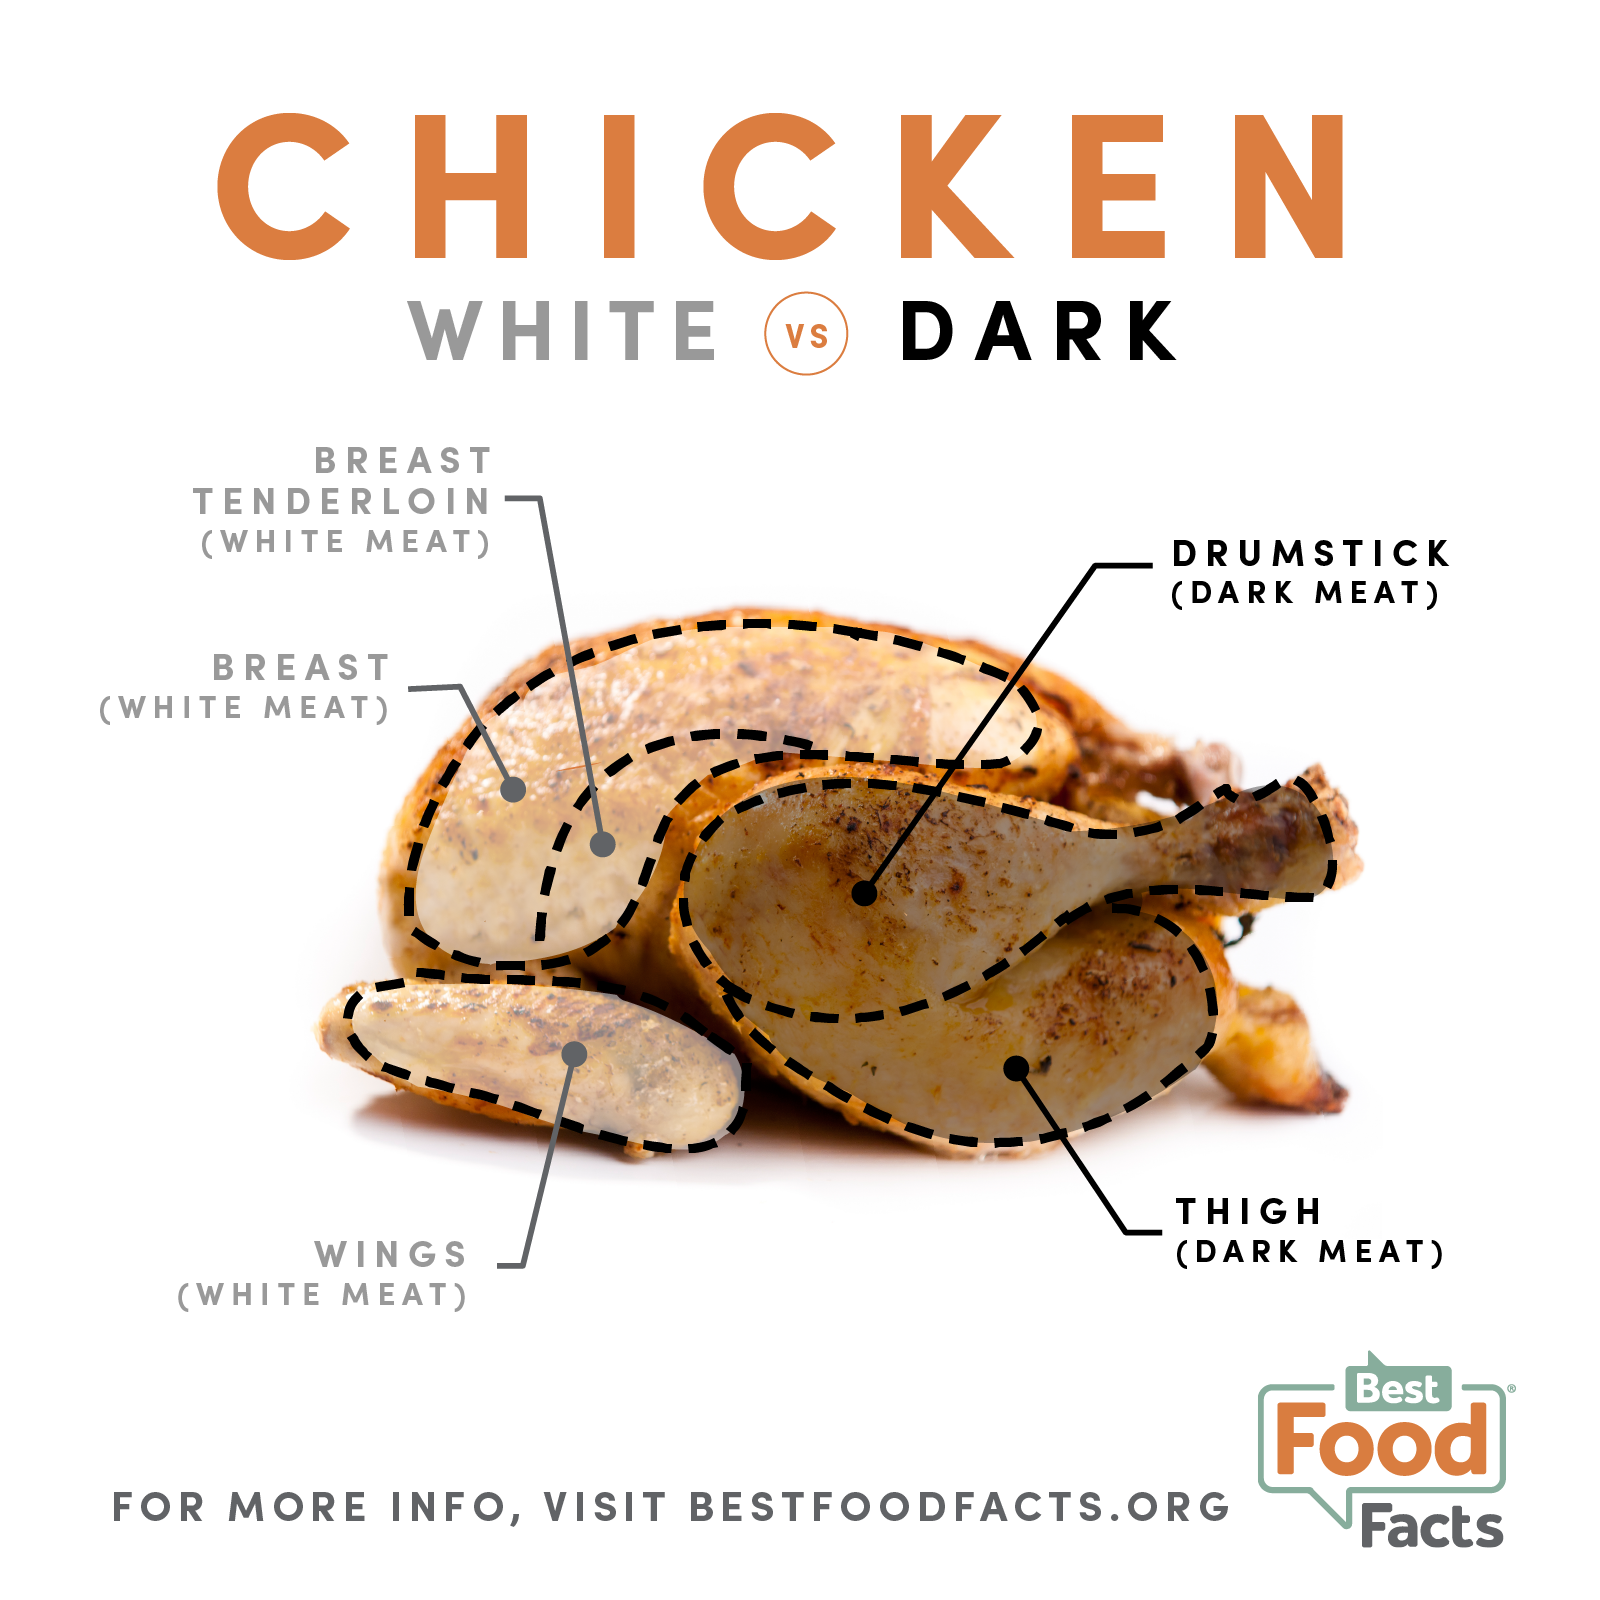 what causes the darker color of dark meat in chickens?